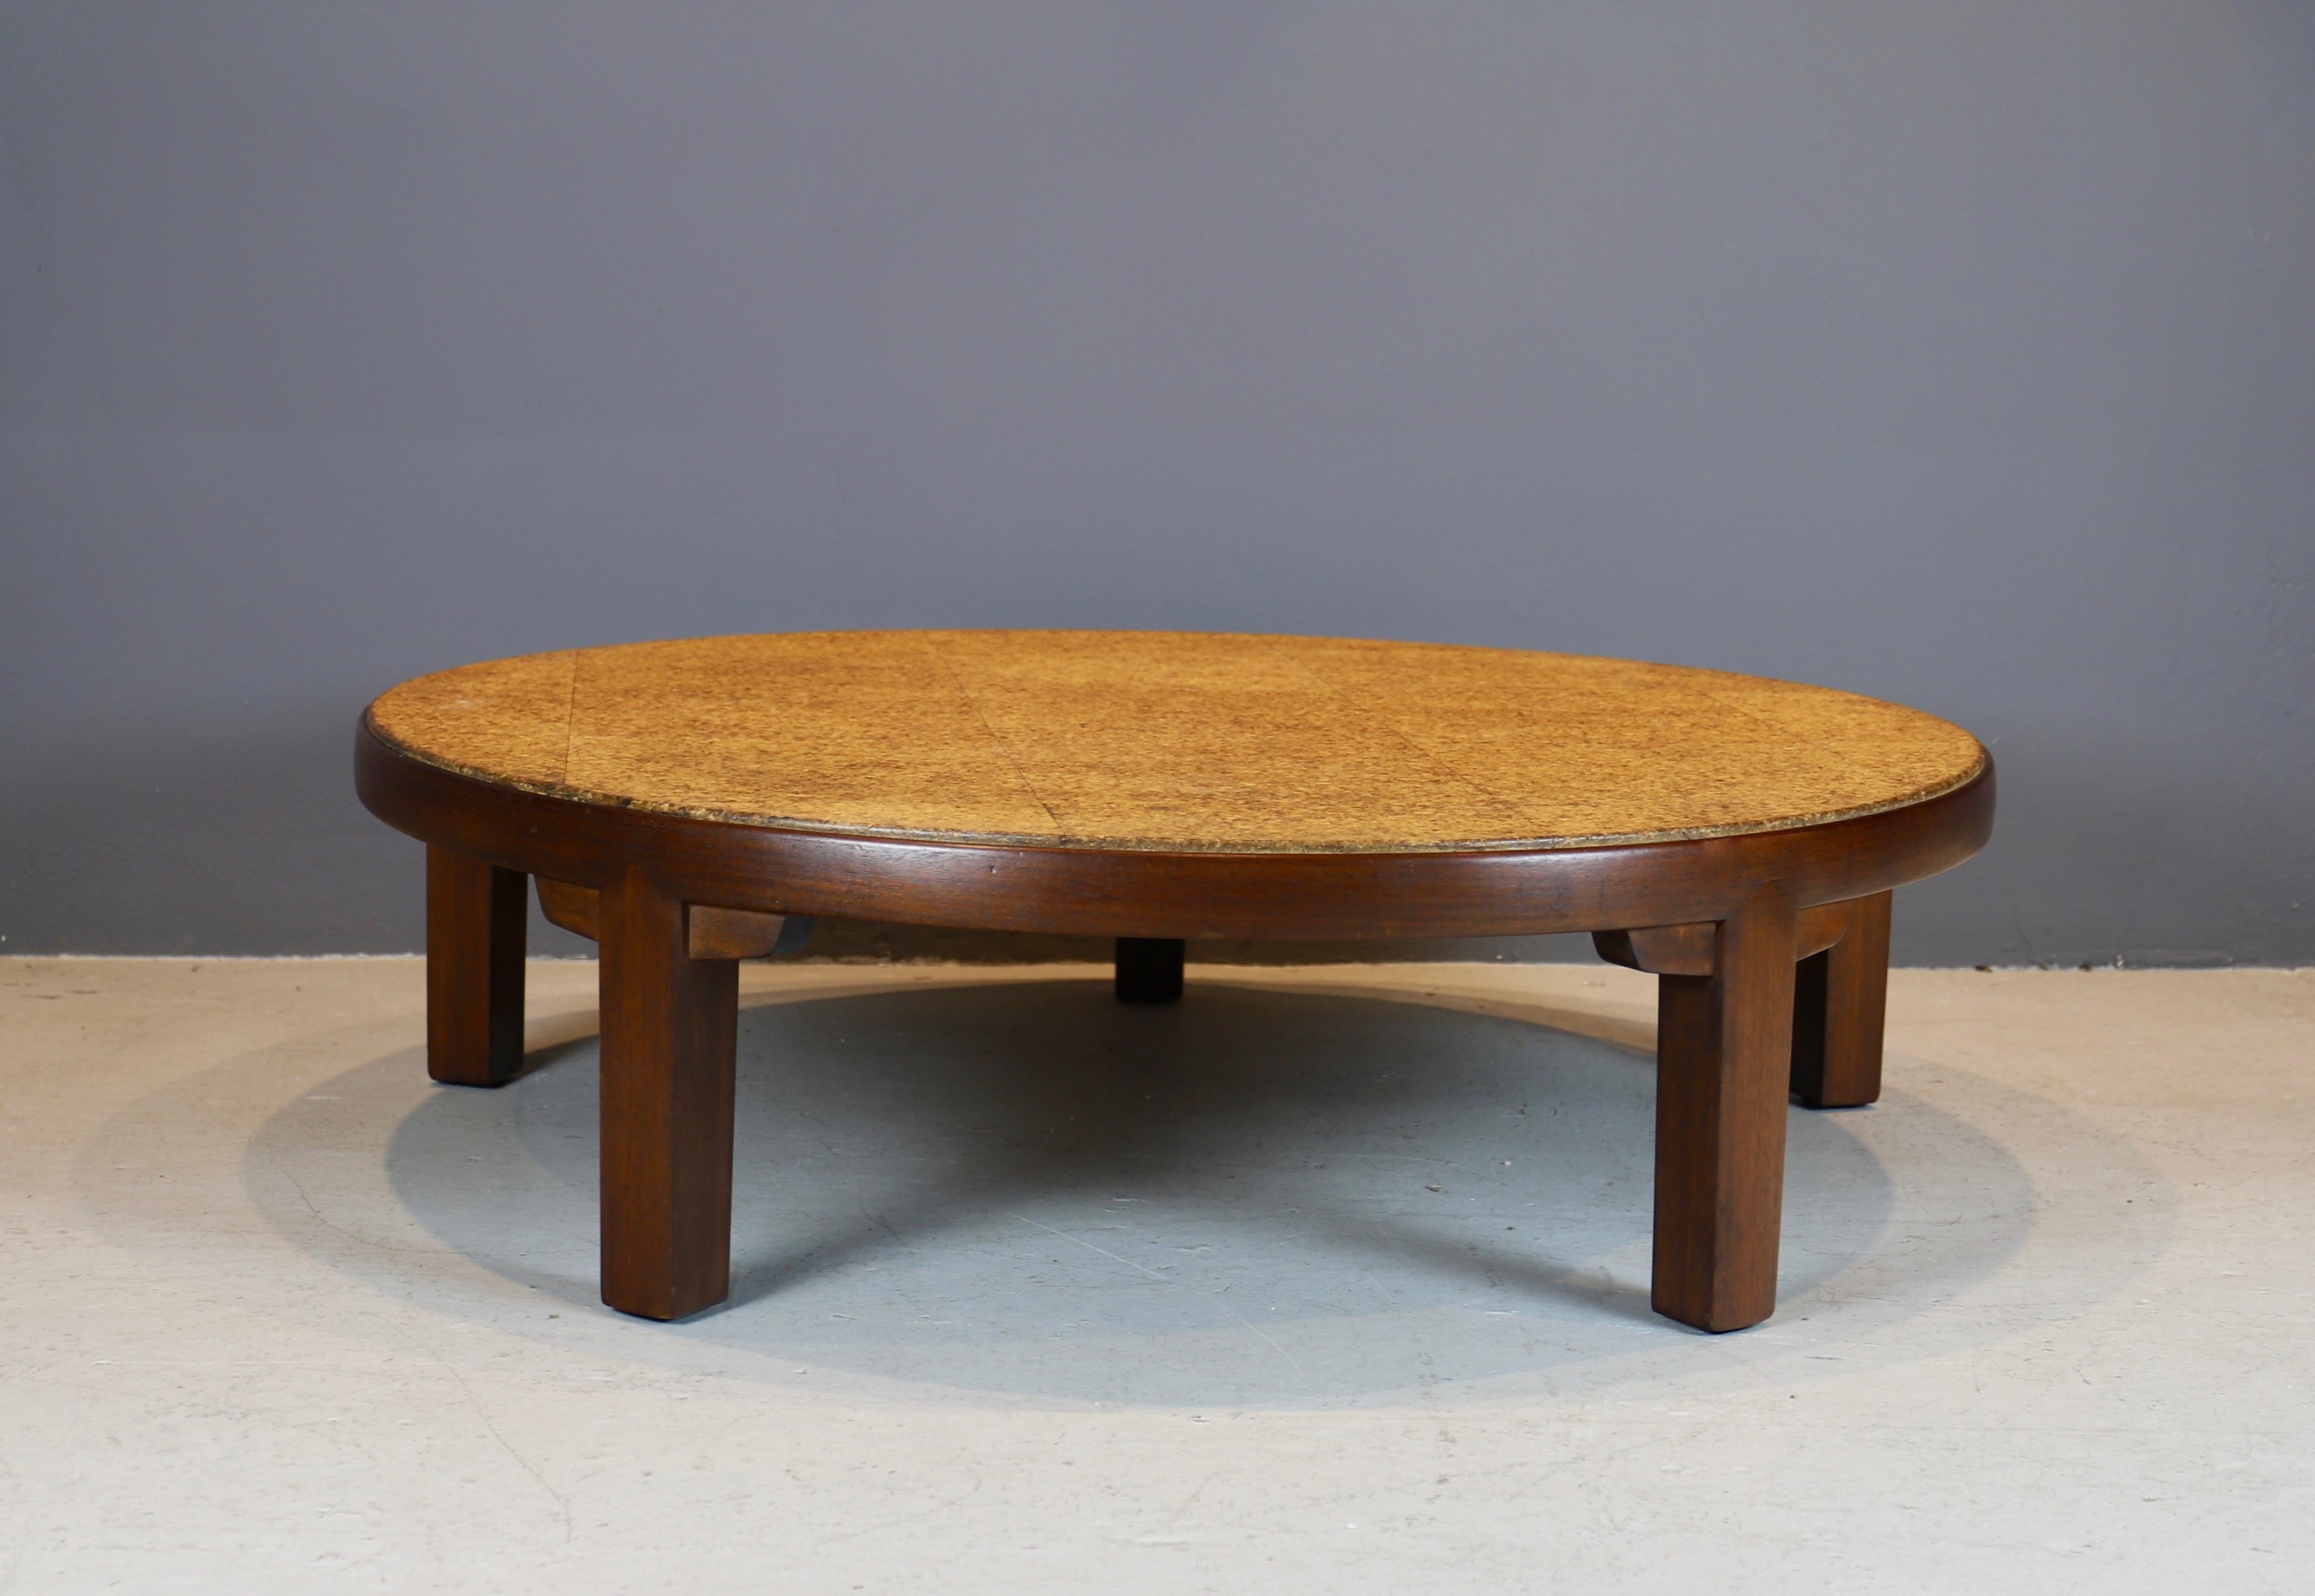 Large scale, round coffee table by Edward Wormley for 